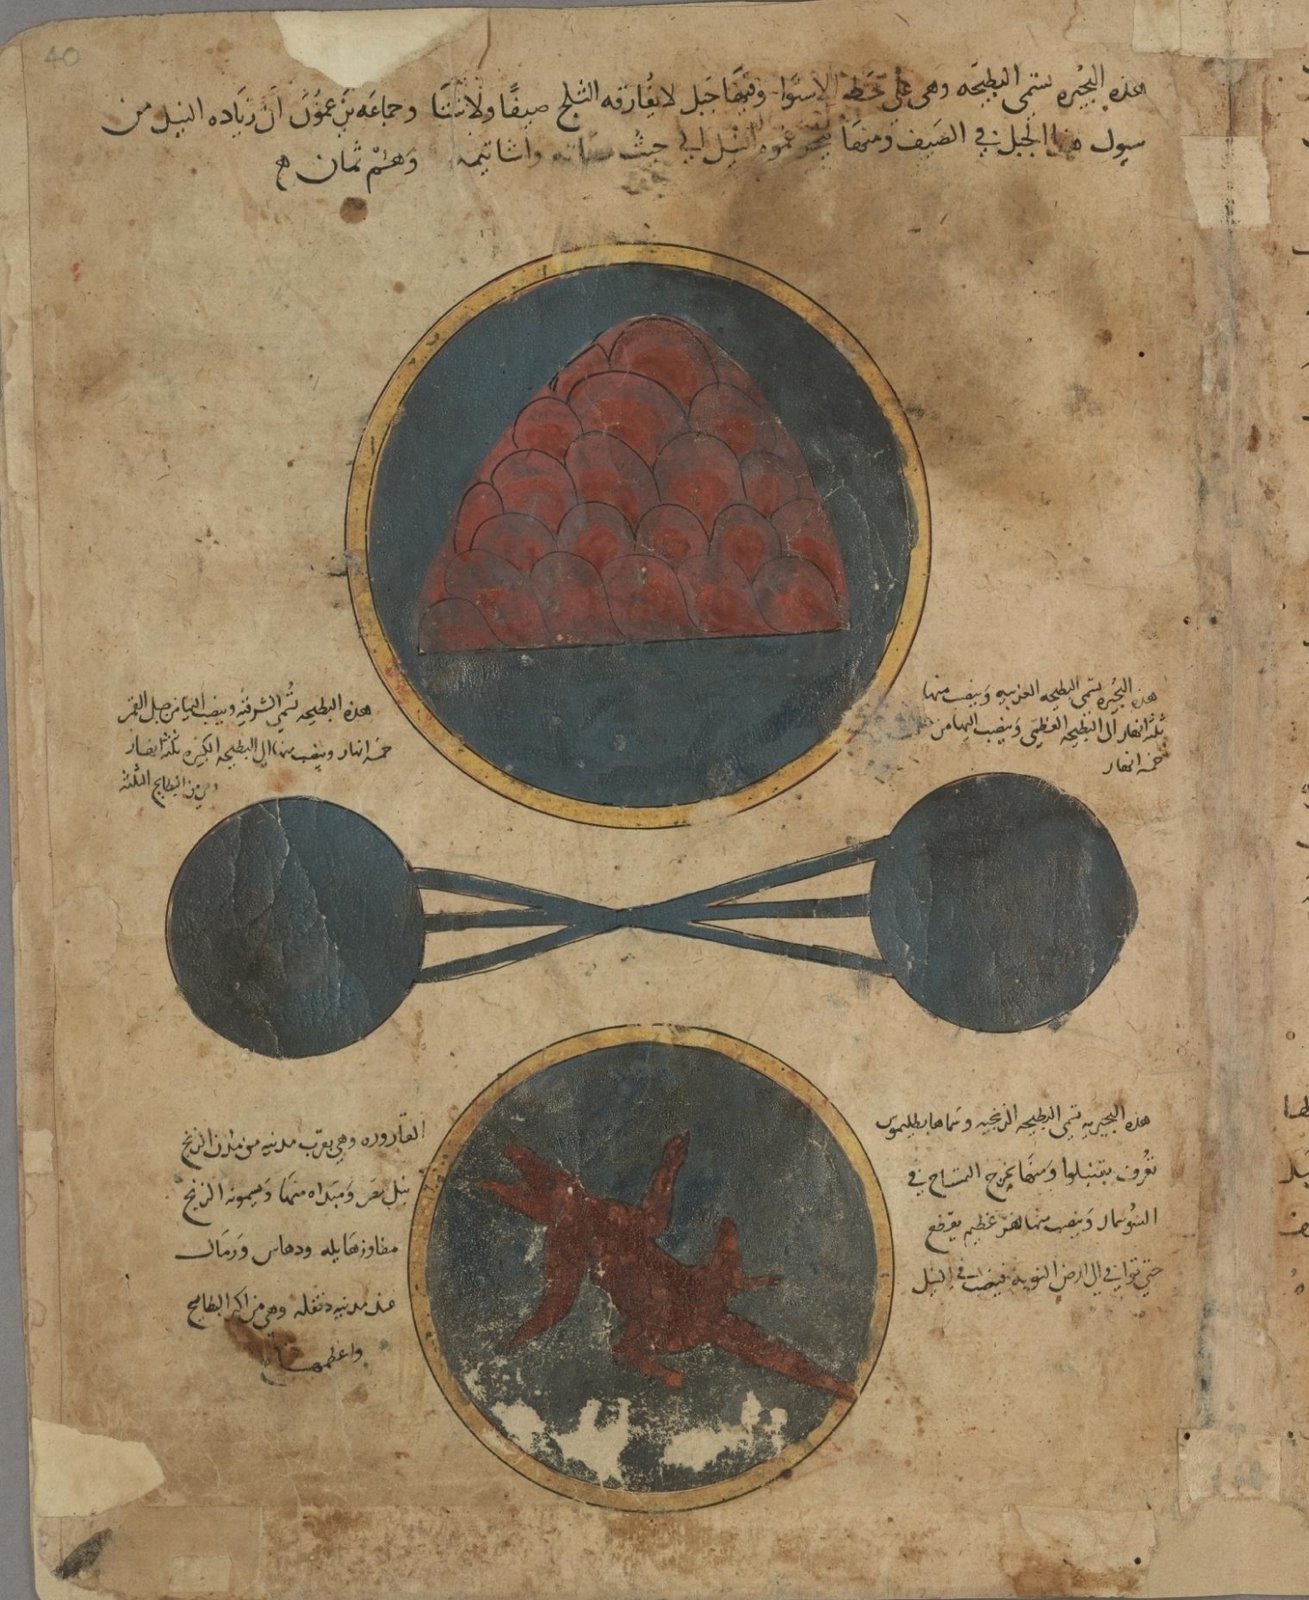 Sources of Nile - stylized imaginings from 11th century